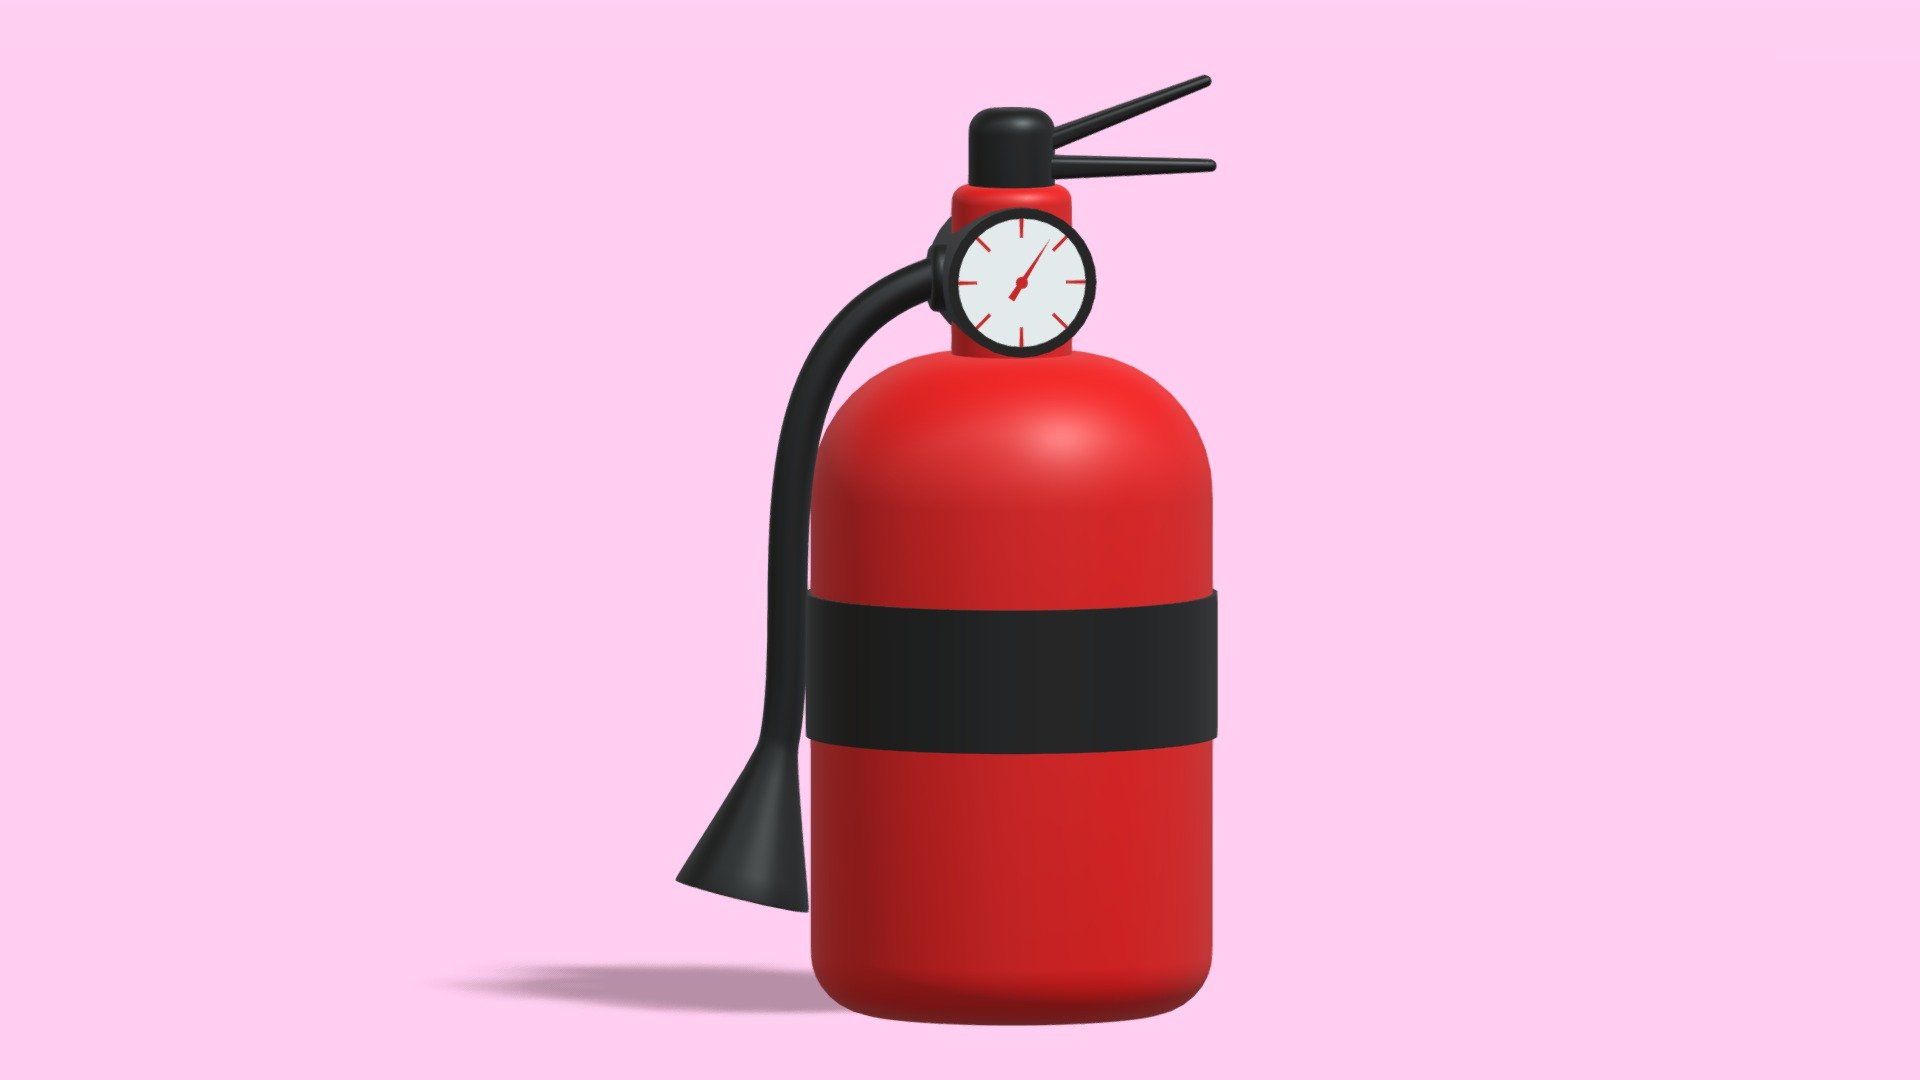 -Cartoon Fire Extinguisher.

-This product contains 6 models.

-This product was created in Blender 2.8.

-vertices: 9,203, polygons: 8,939.

-Formats: blend, fbx, obj, c4d, dae, fbx,unity.

-We hope you enjoy this model.

-Thank you 3d model